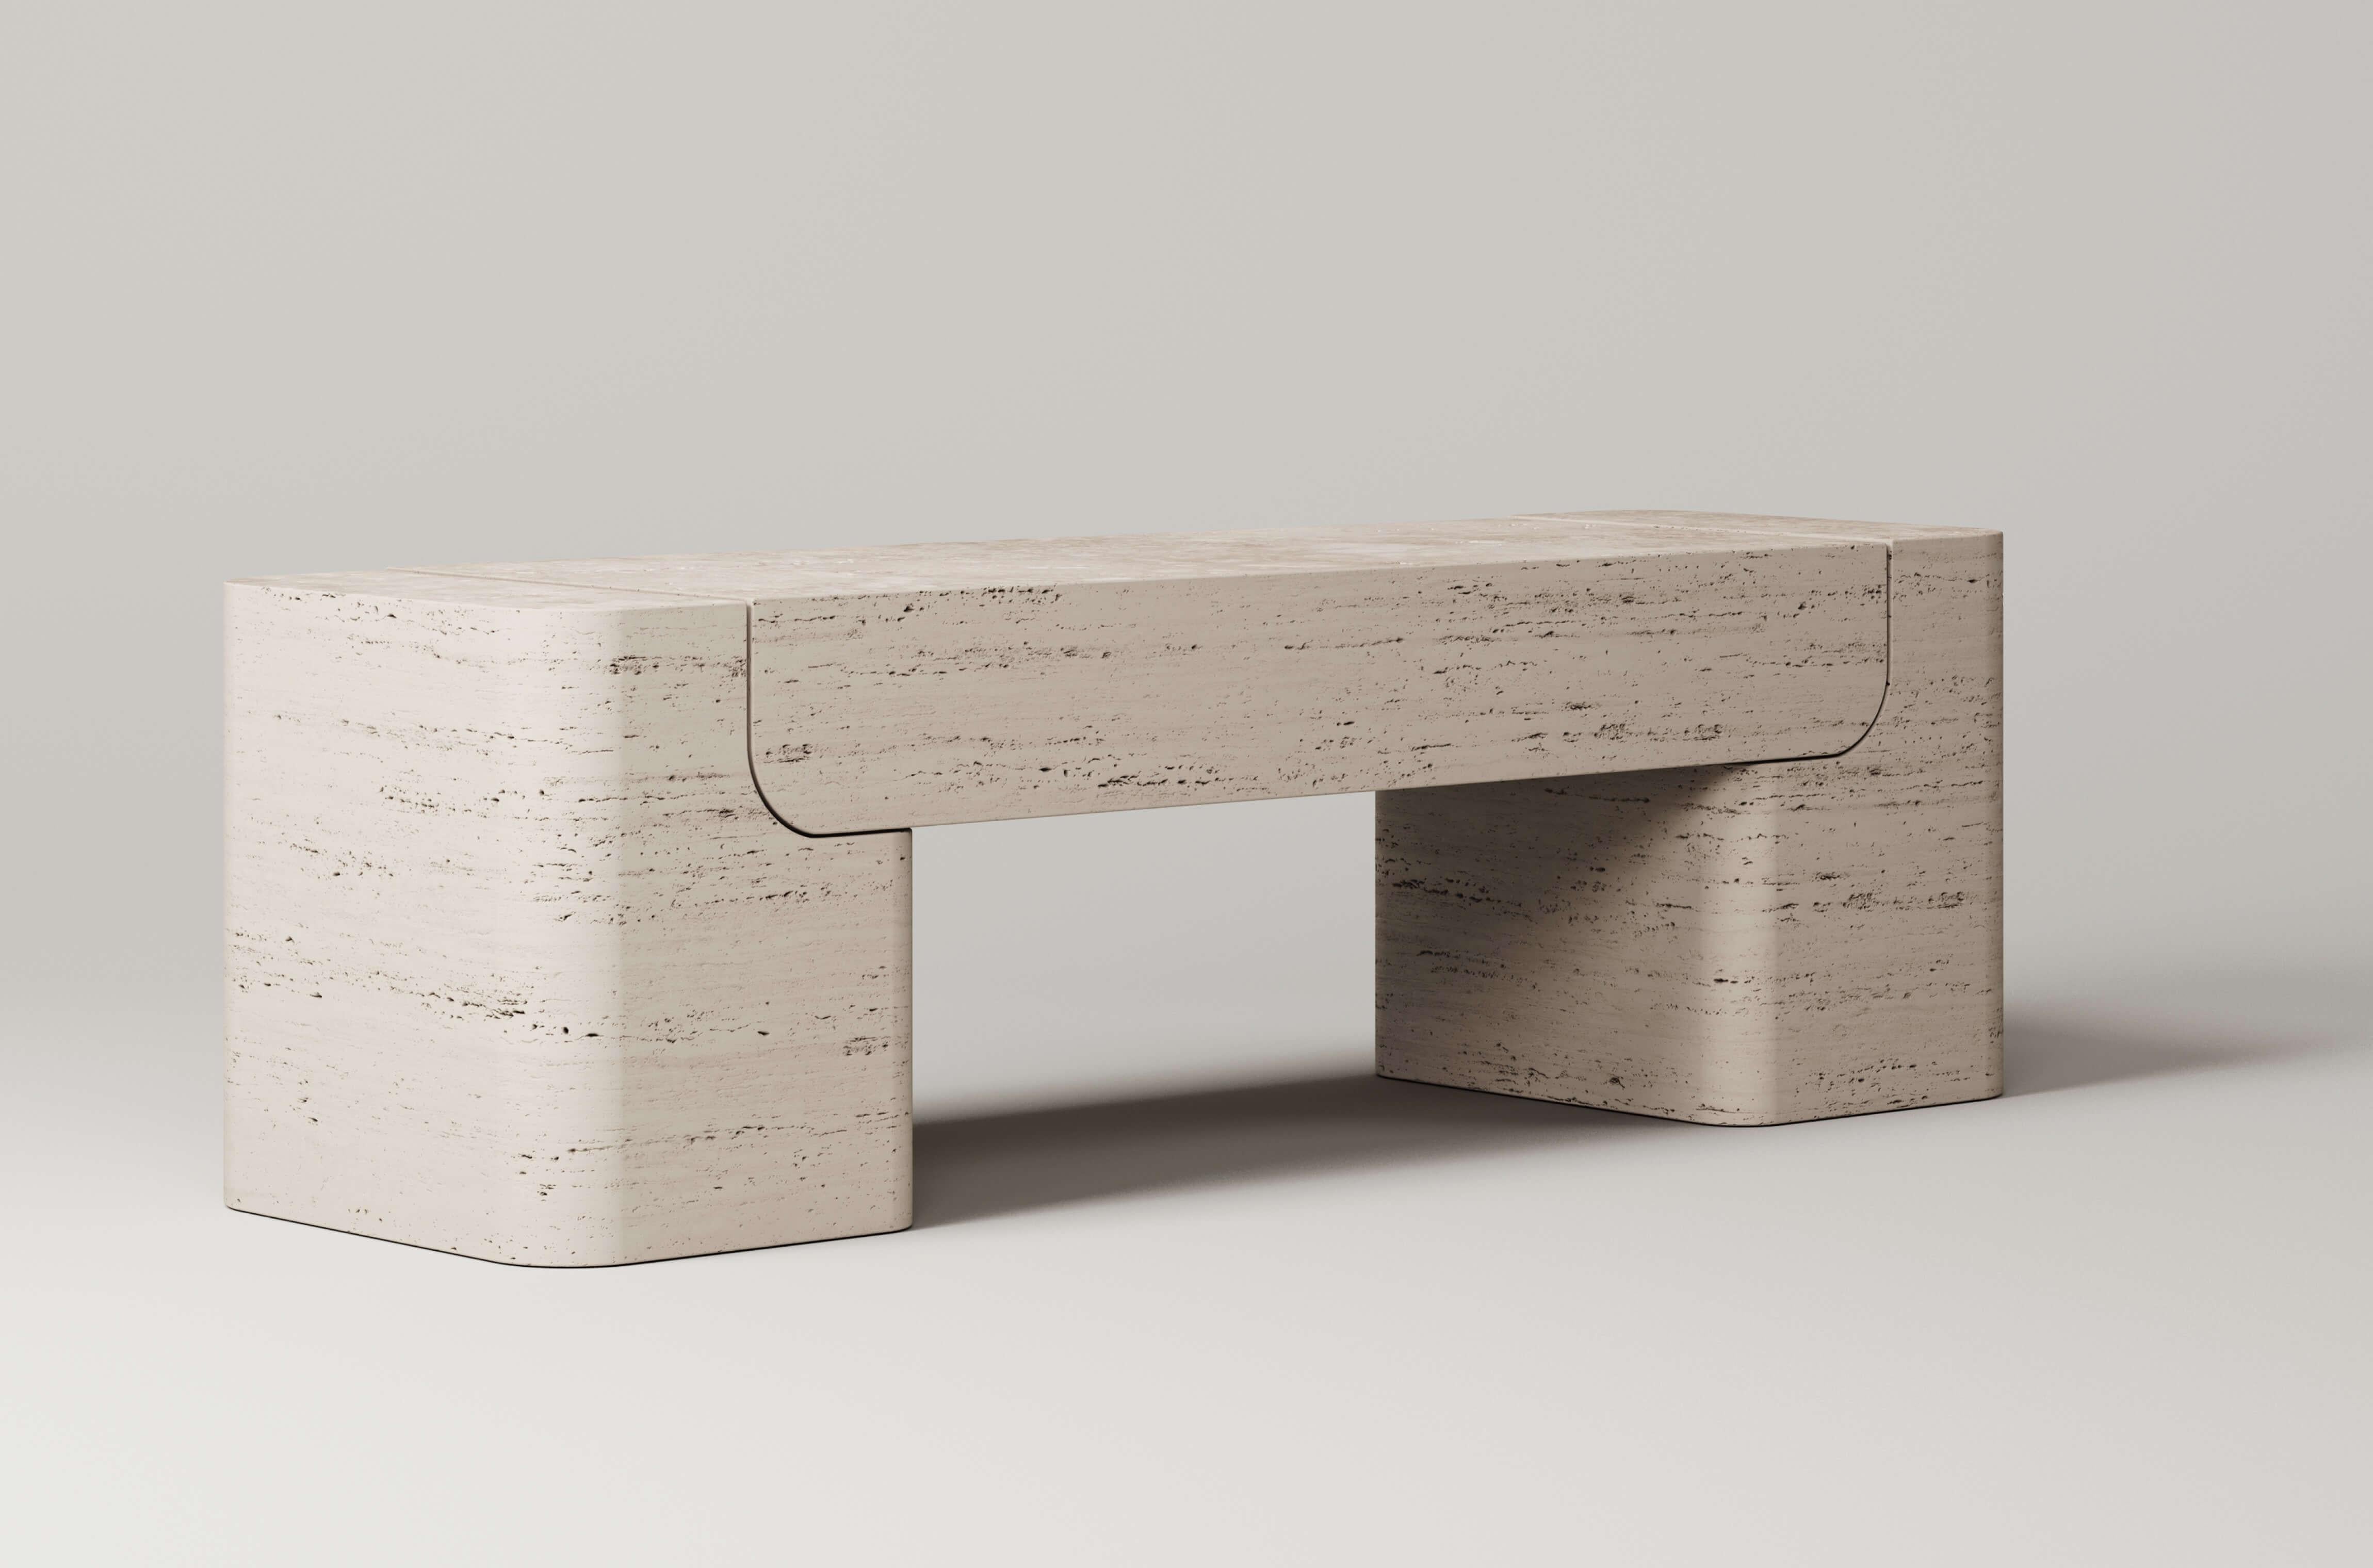 M_005 Travertine Bench by Monolith Studio
Signed and Numbered.
Dimensions: D 40 x W 132 x H 40 cm.
Materials: Travertine.

Available in travertine, walnut, white oak and lava rock.  Please contact us. 

Monolith, founded in 2022 by Marc Personick,